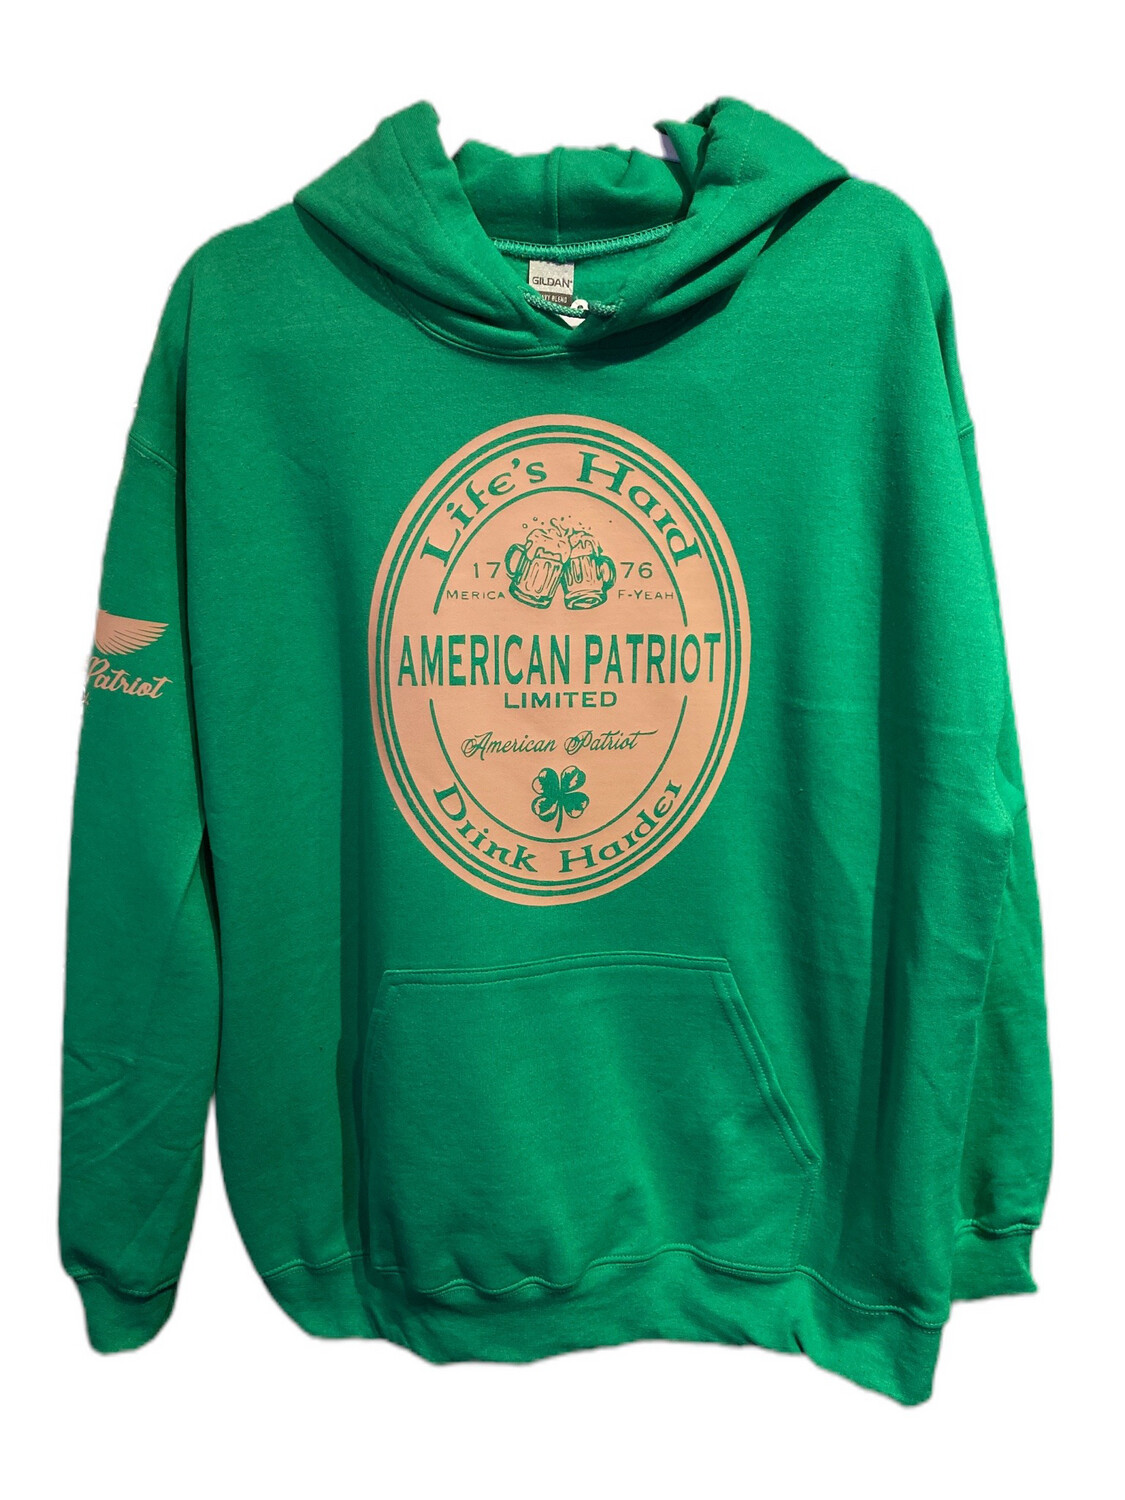 Drink Harder Hoodie Green with Tan 